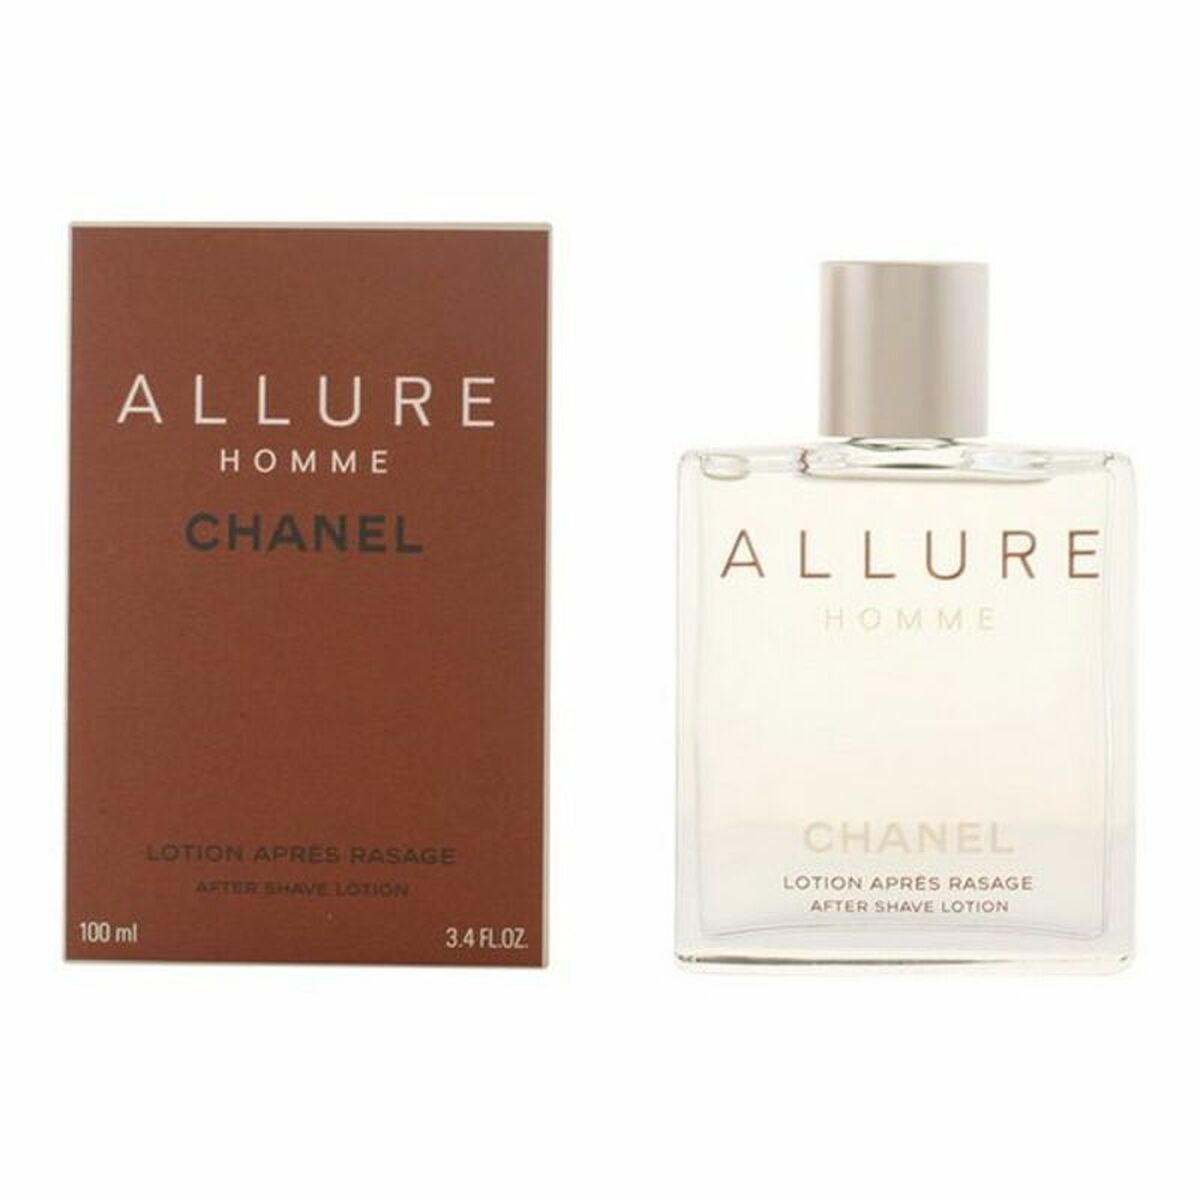 Kaufe Aftershave Lotion Allure Homme Chanel Allure Homme 100 ml bei AWK Flagship um € 105.00